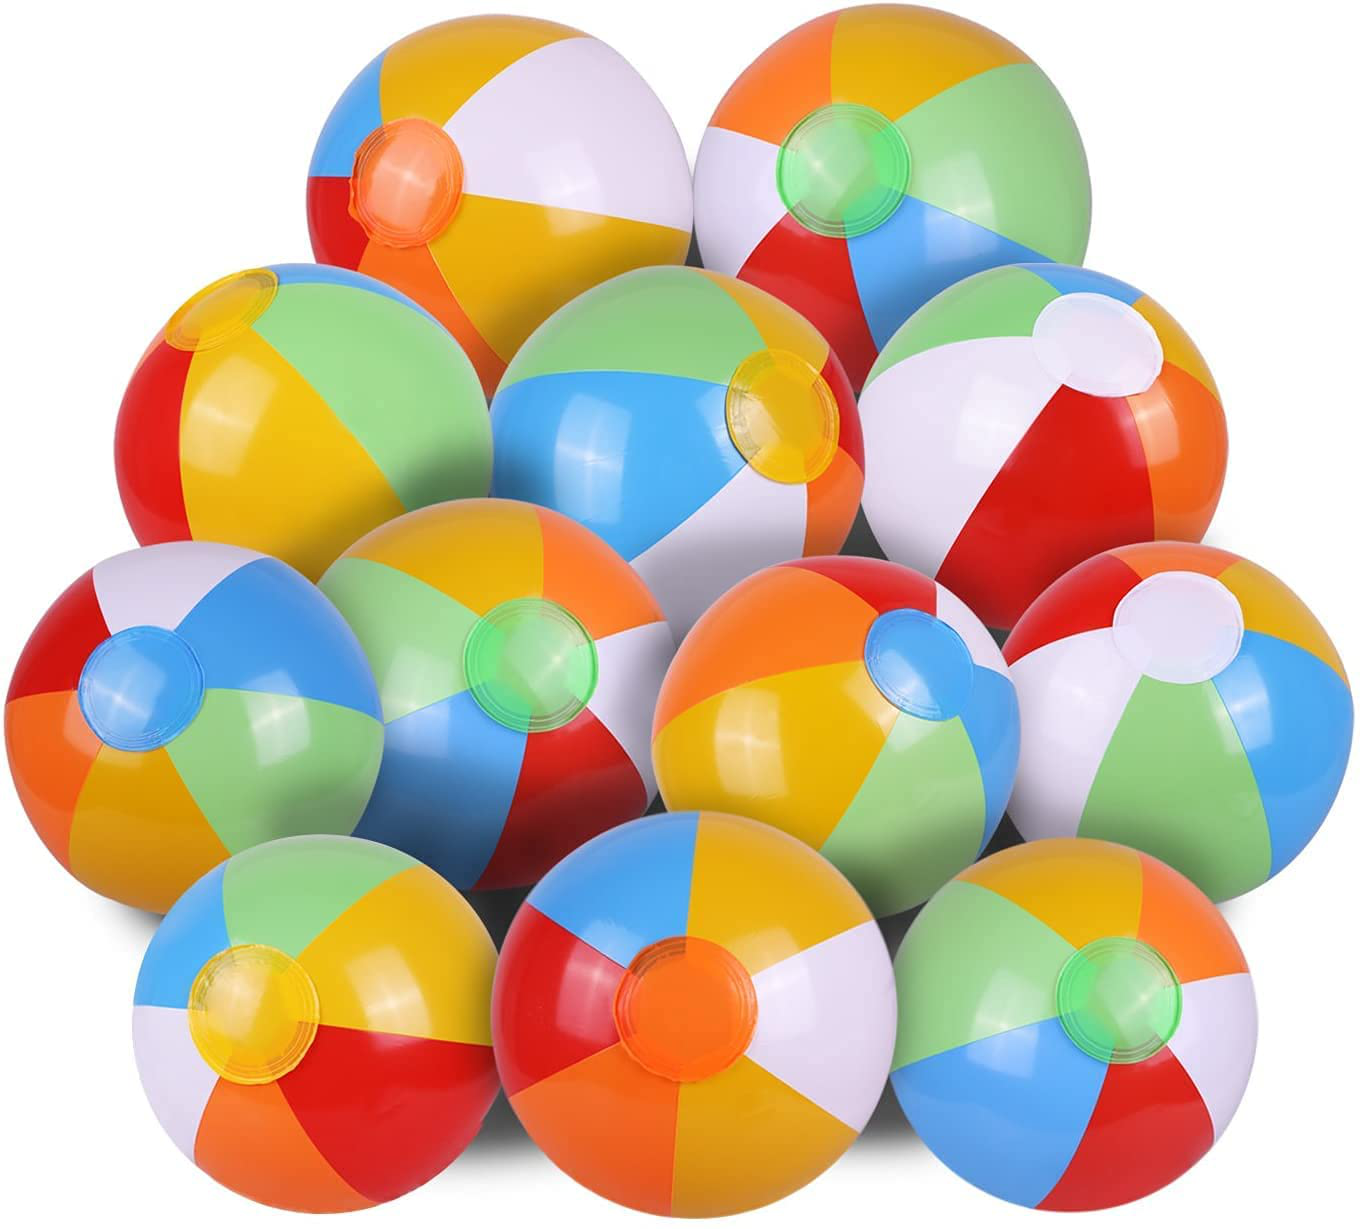 SYZ 12" Beach Balls Bulk - Inflatable Swimming Pool Toys for Kids Birthday Party Supplies Favors Luau Decorations - Blow Up Classic Rainbow Color Beachball Summer Water Games Fun Gifts (12 Pack)